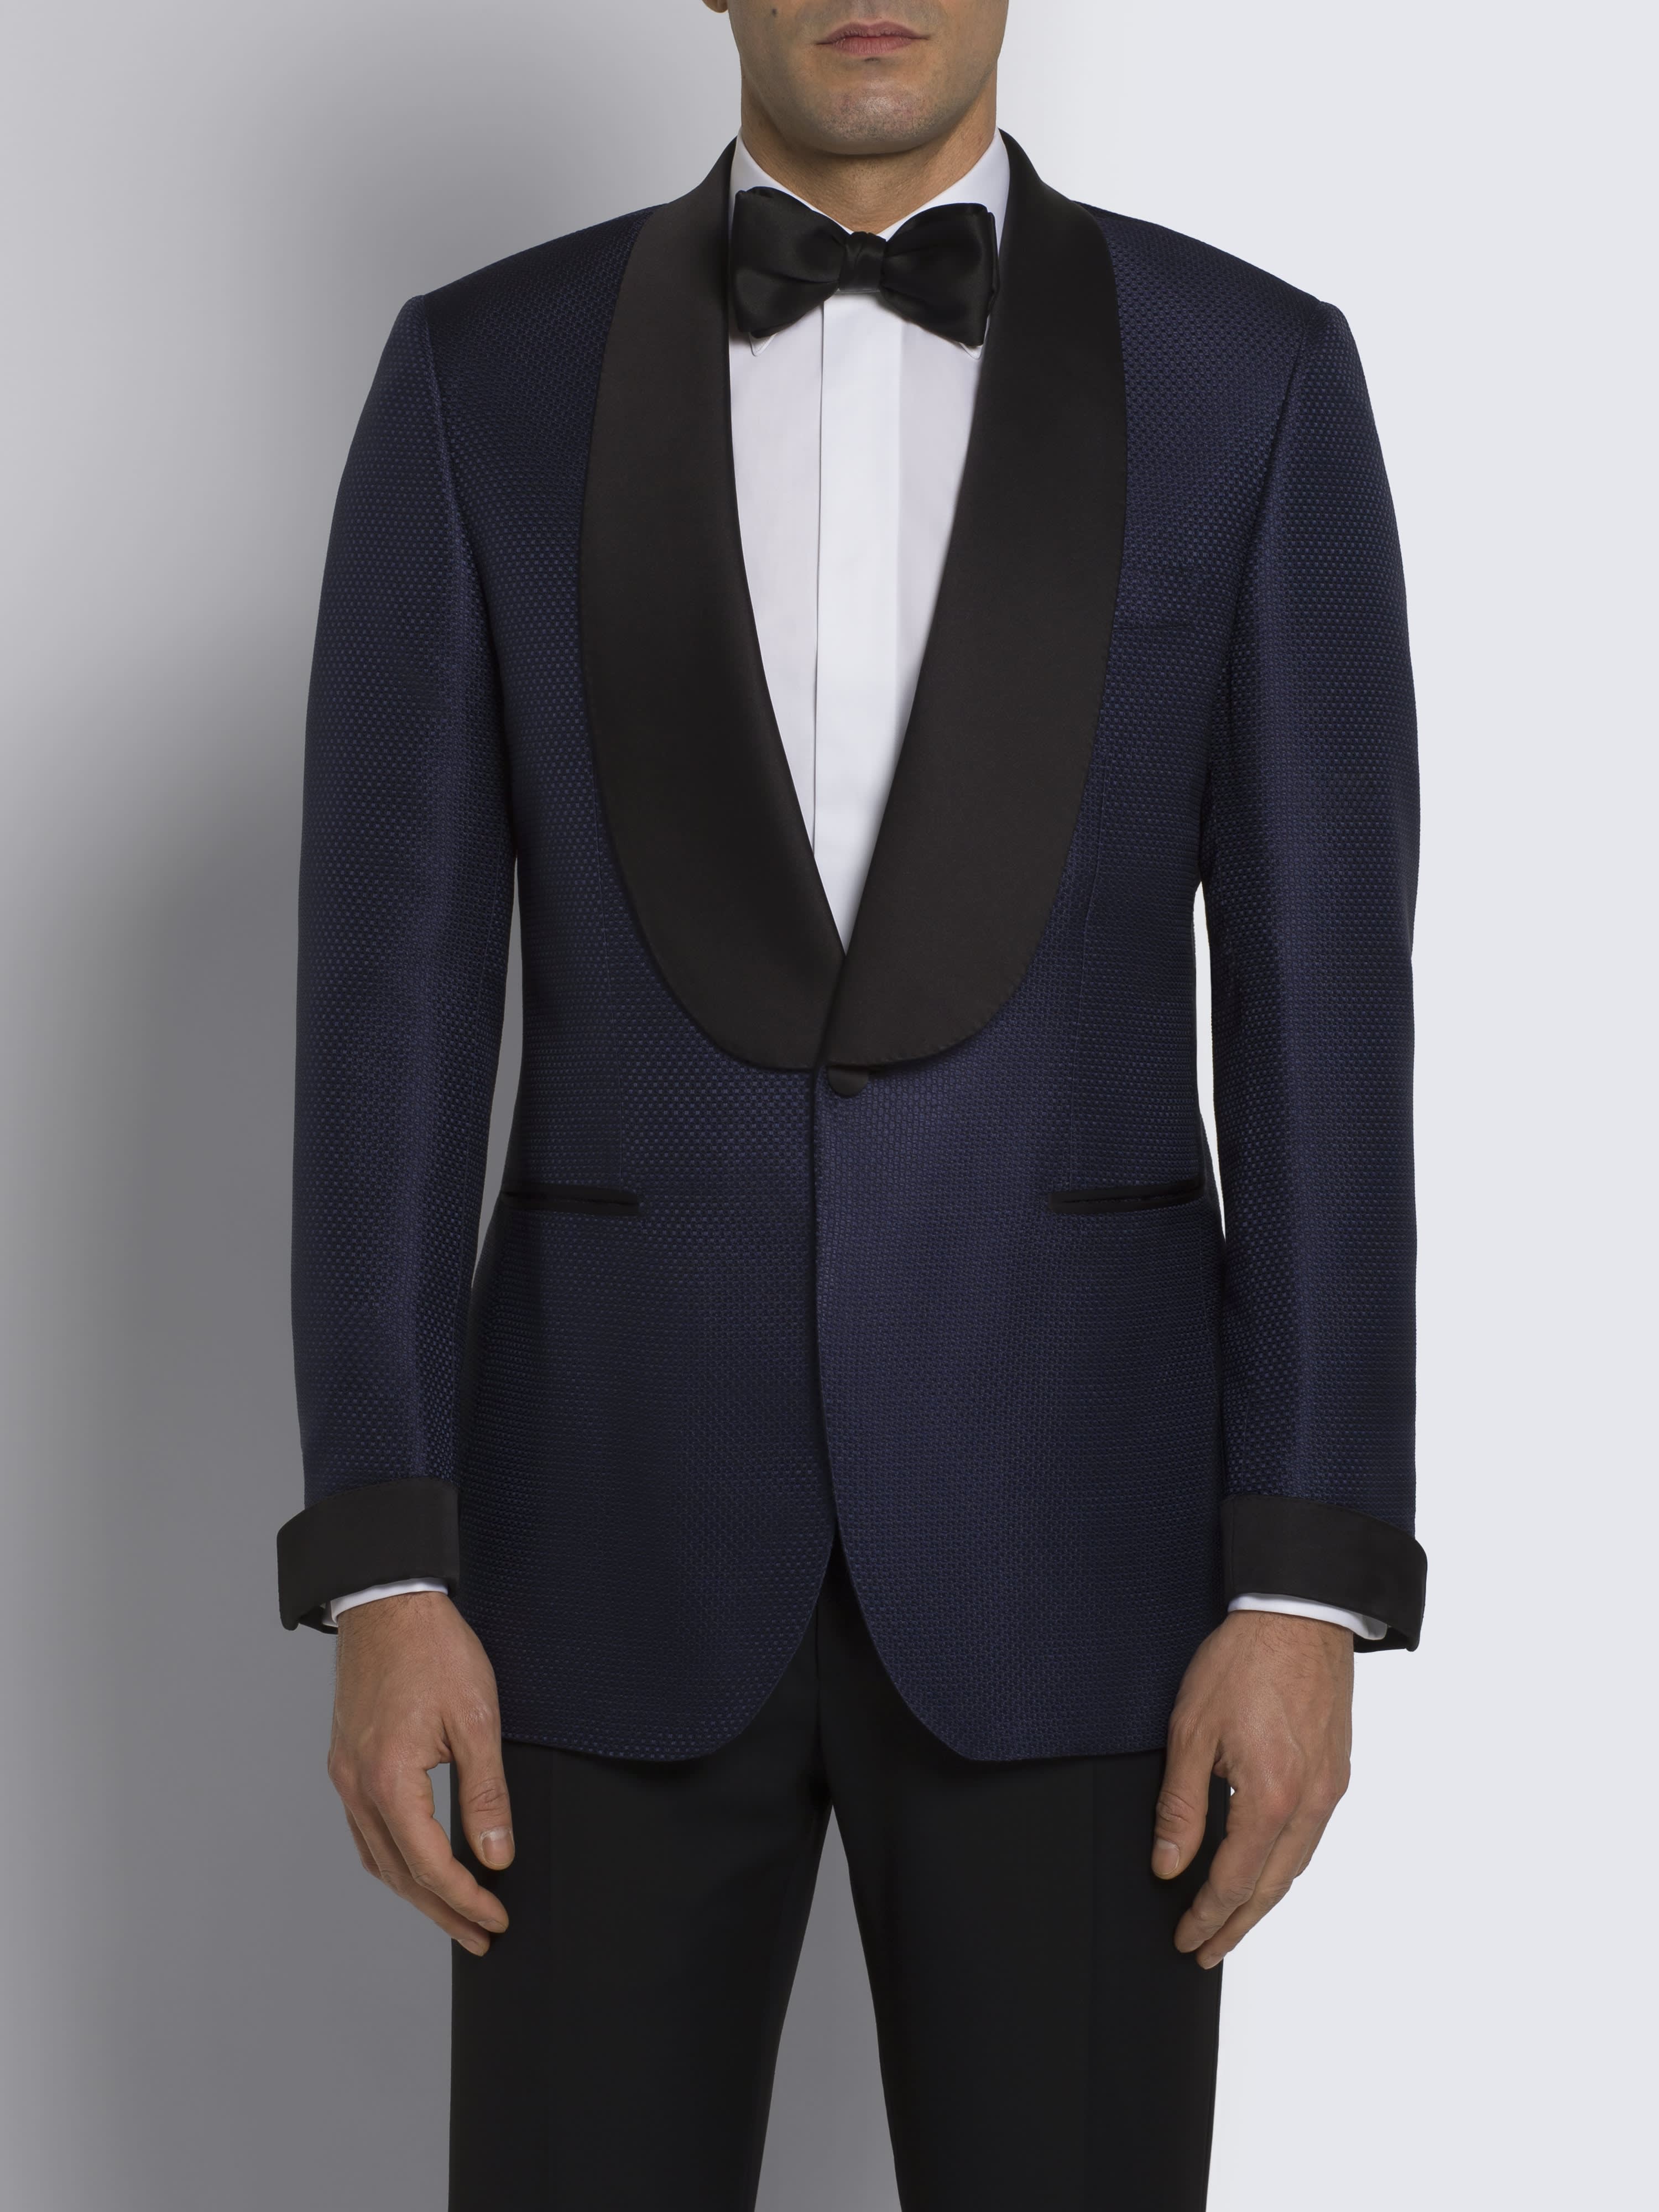 Tuxedos | Brioni® US Official Store